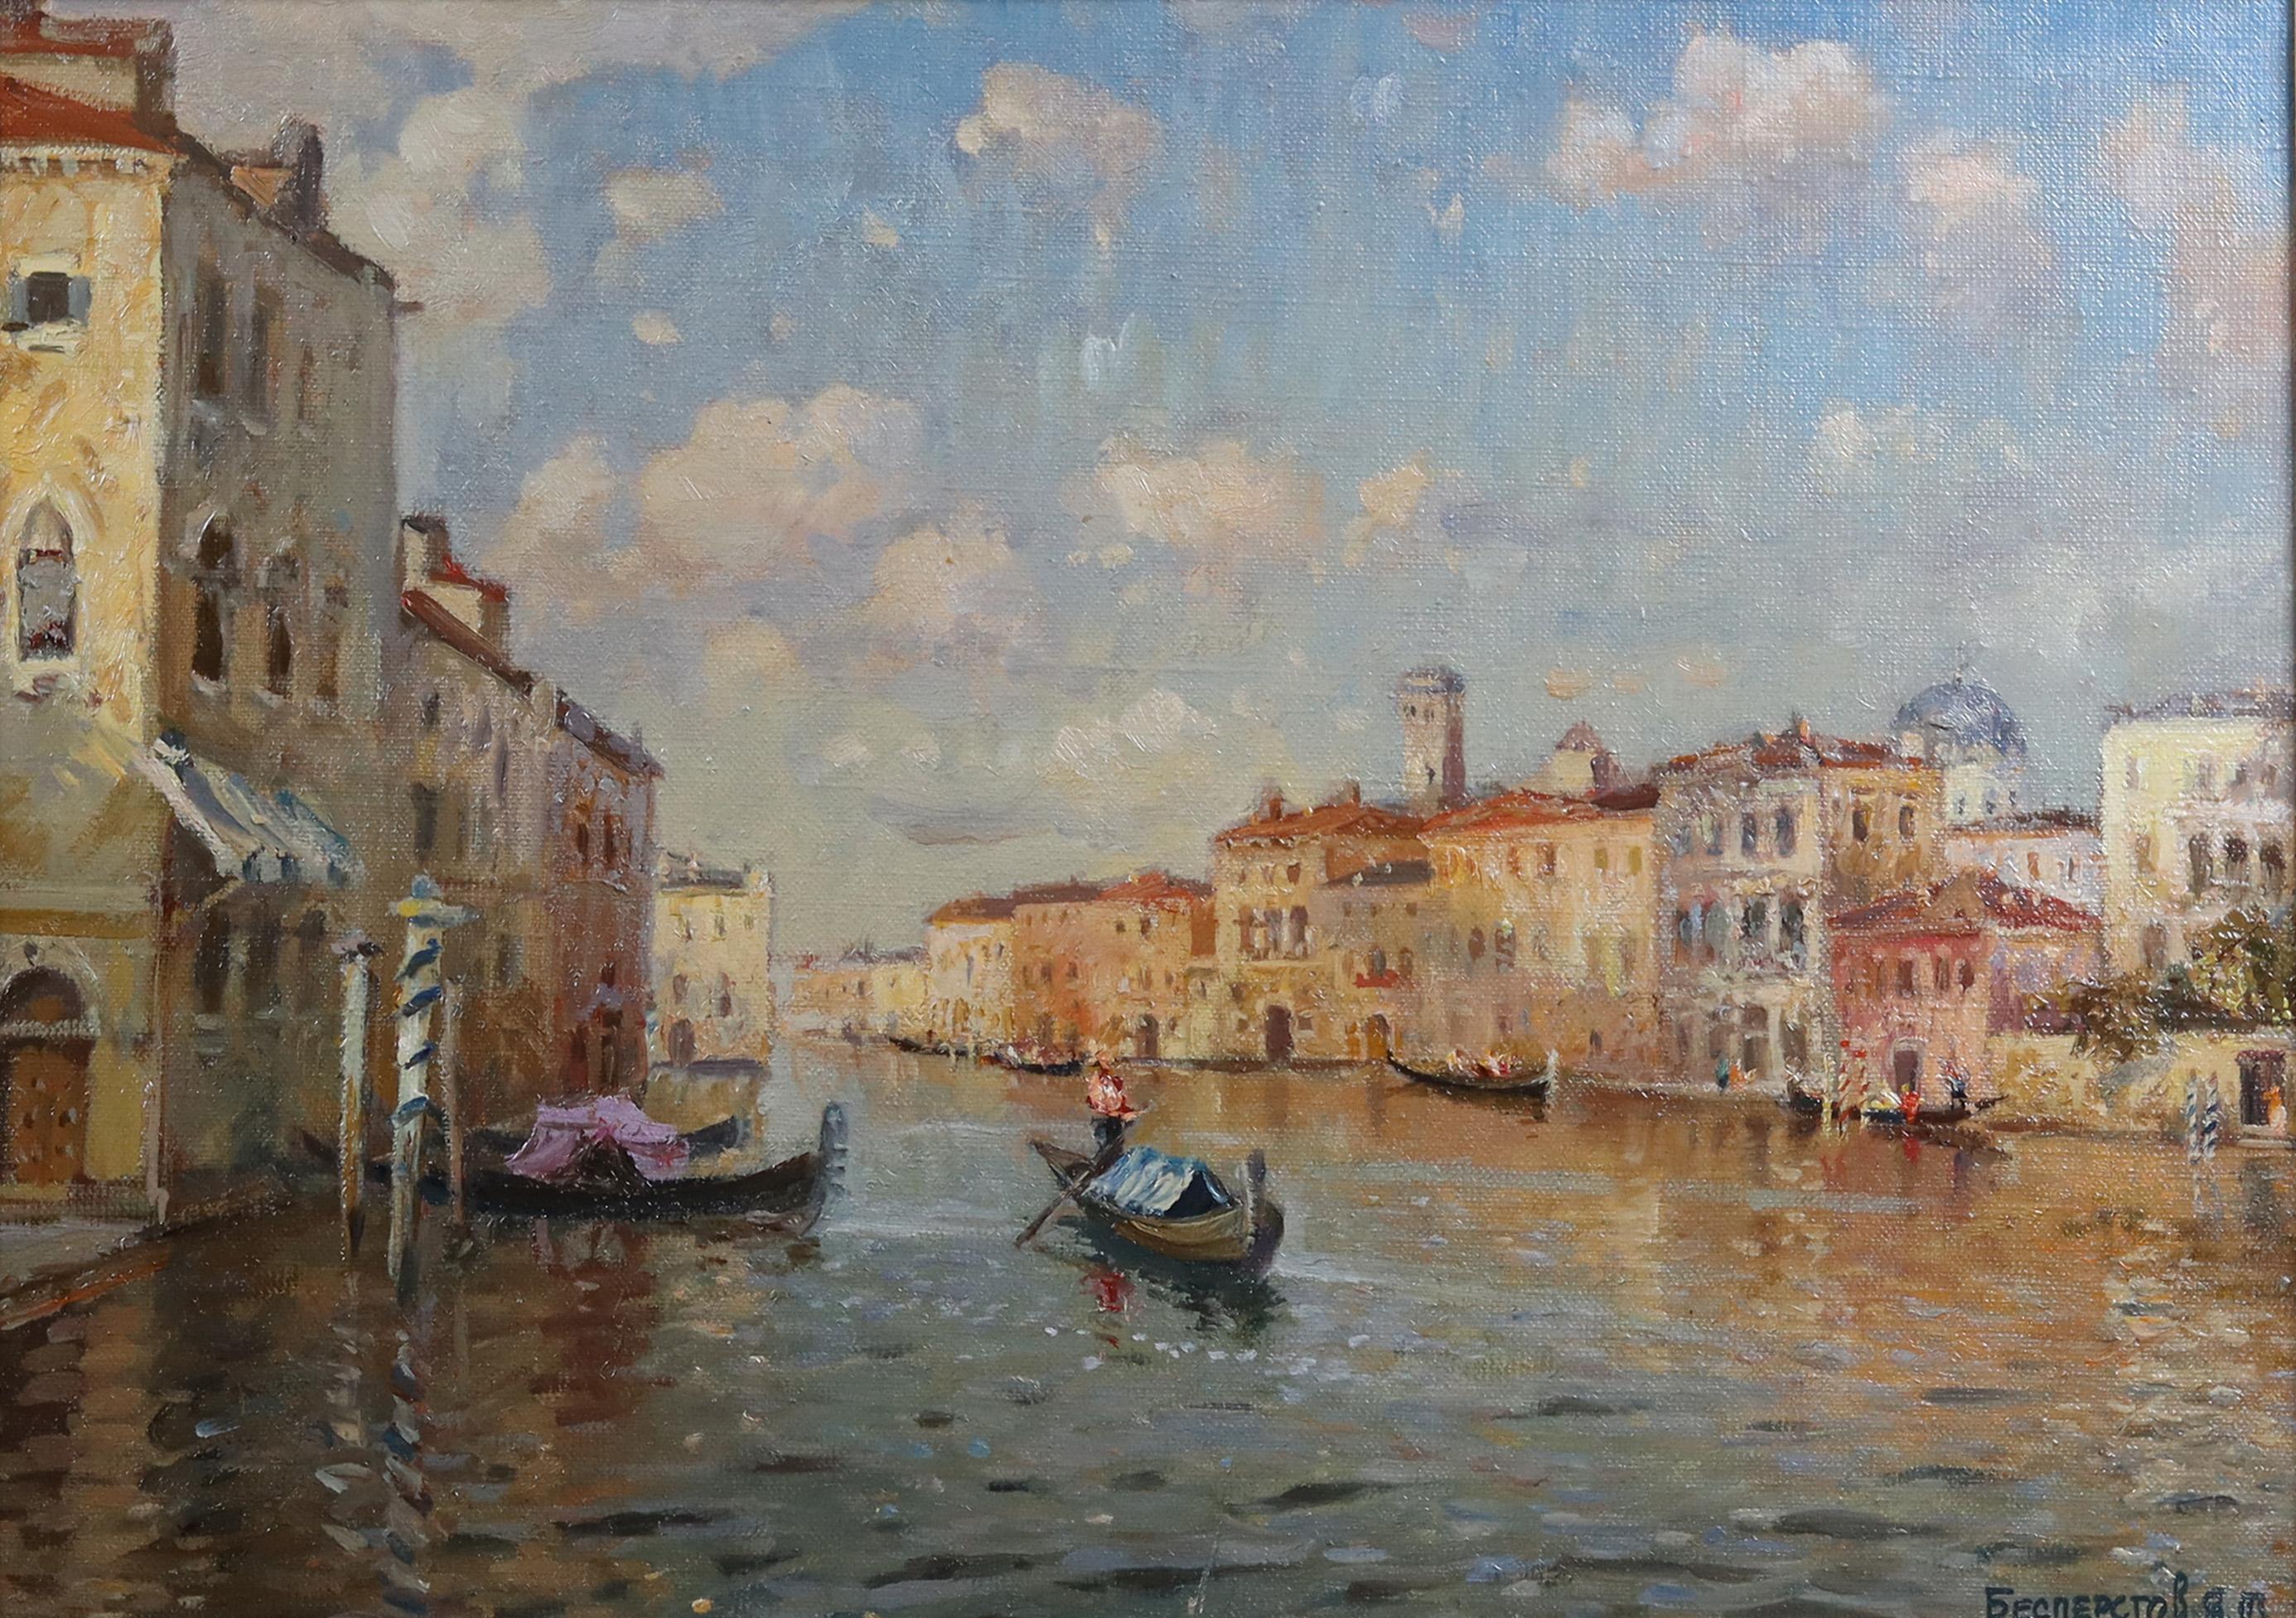  A Venetian Canal Scene - Impressionist Painting by Yakov Besperstov